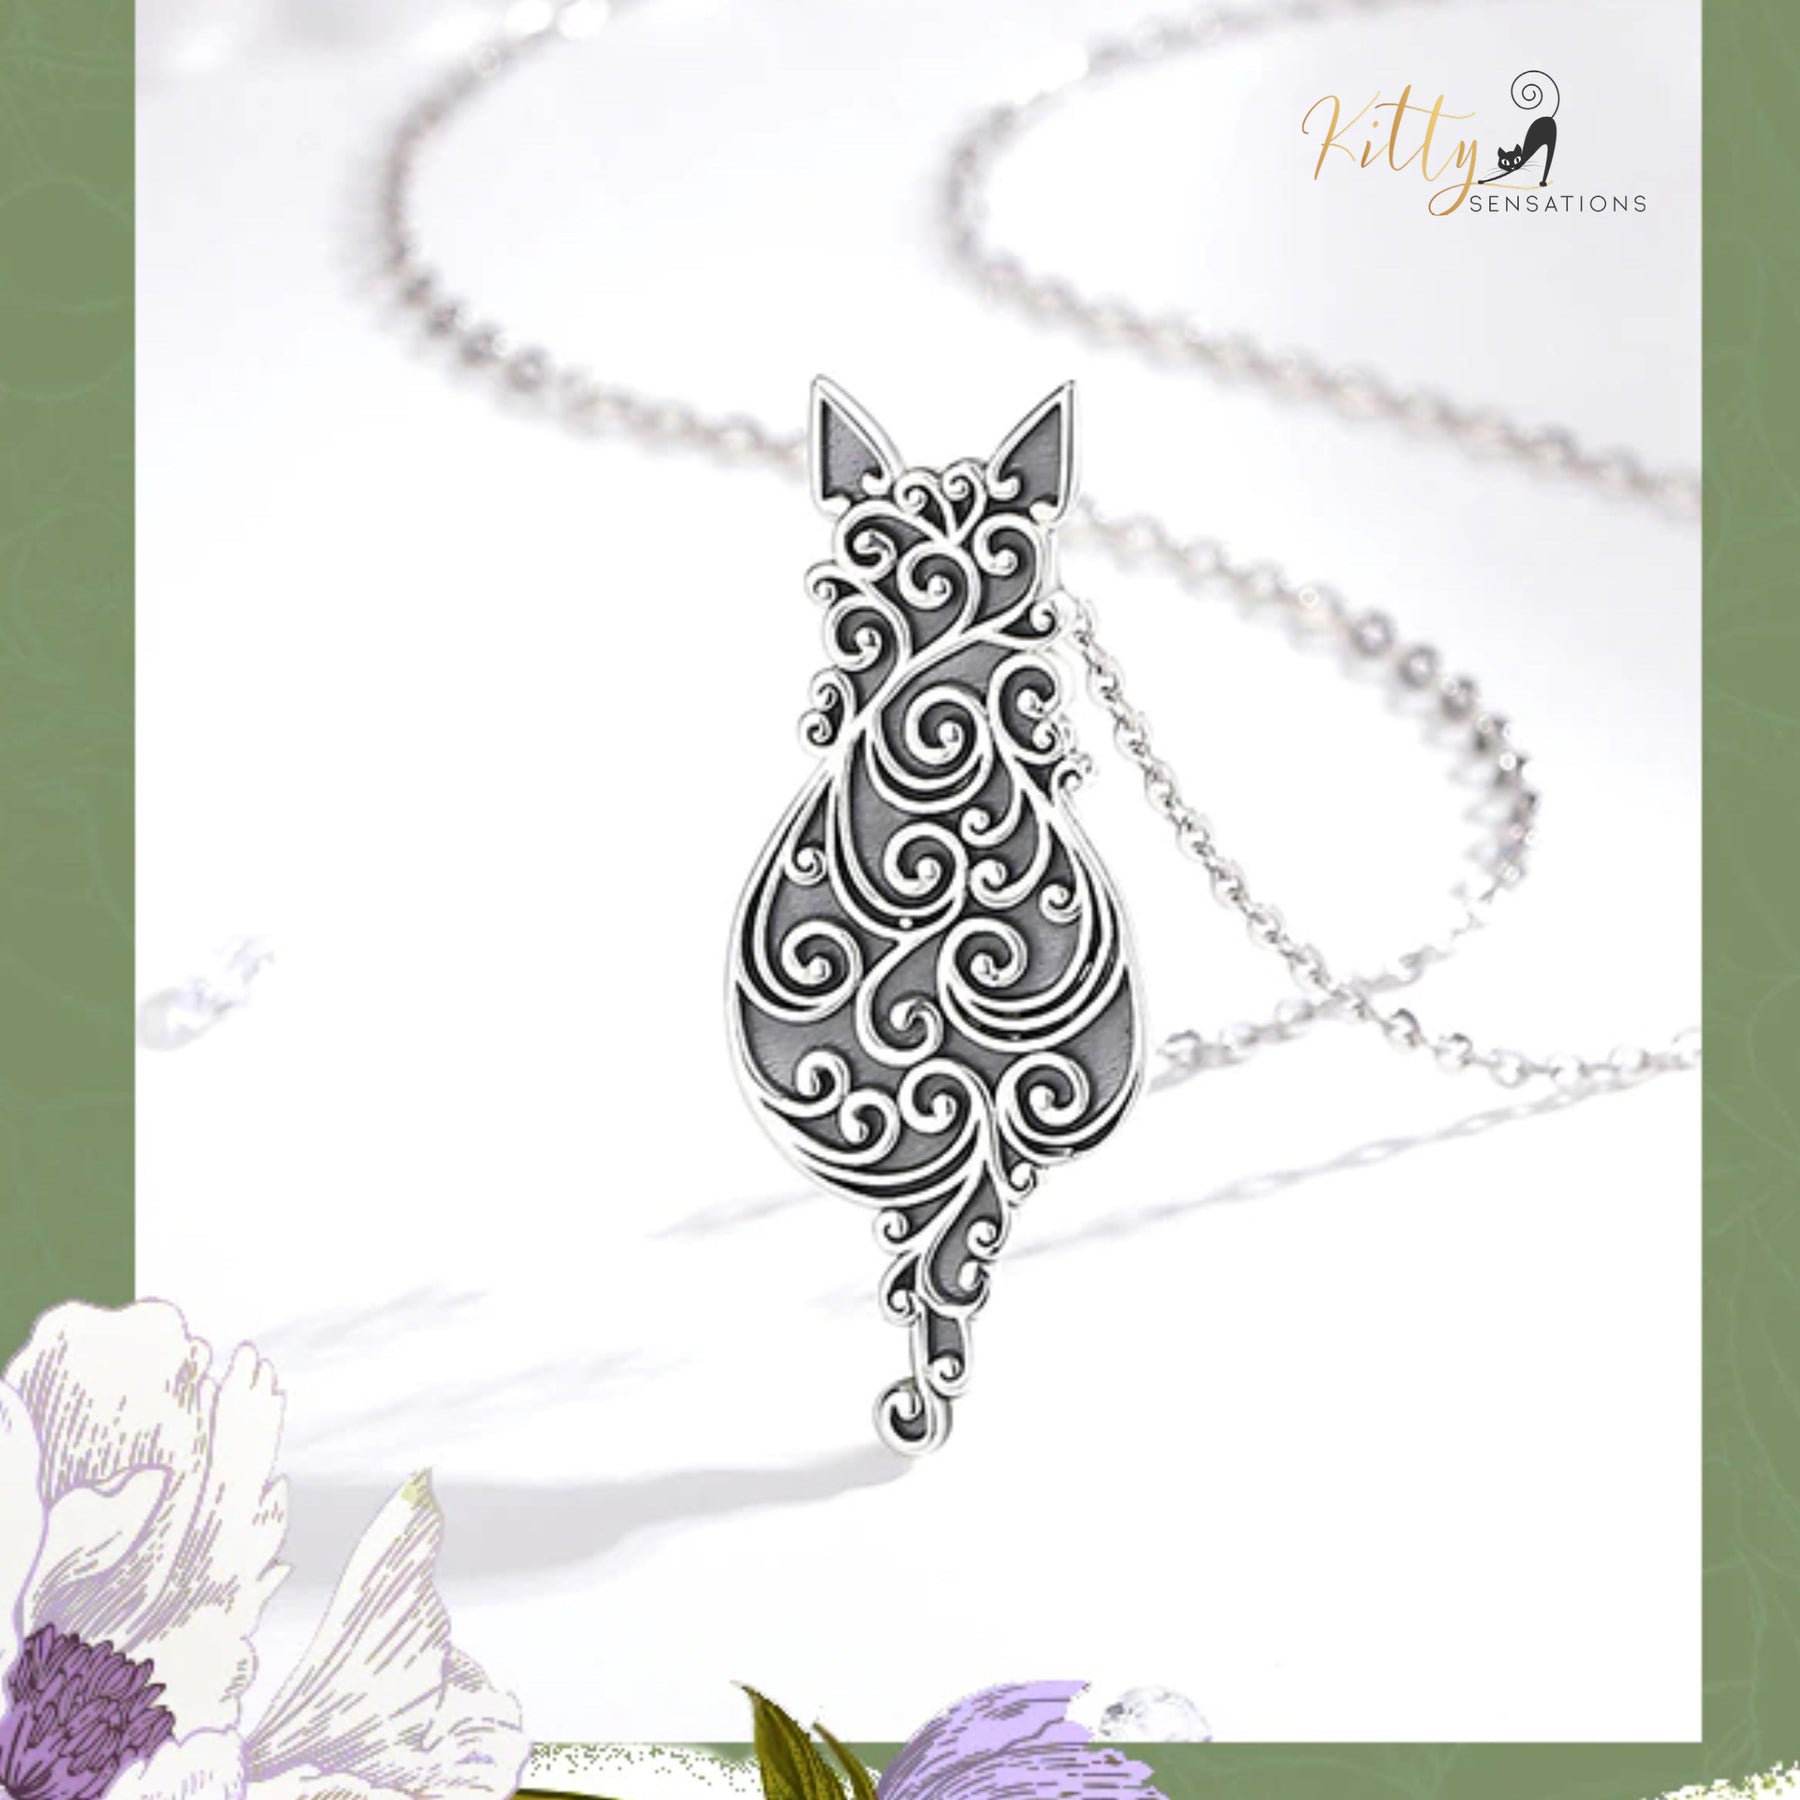 http://KittySensations.com Filigree Cat Over Solid 925 Sterling Silver Cat Necklace ($103.84): https://kittysensations.com/products/filigree-cat-over-solid-925-sterling-silver-cat-necklace